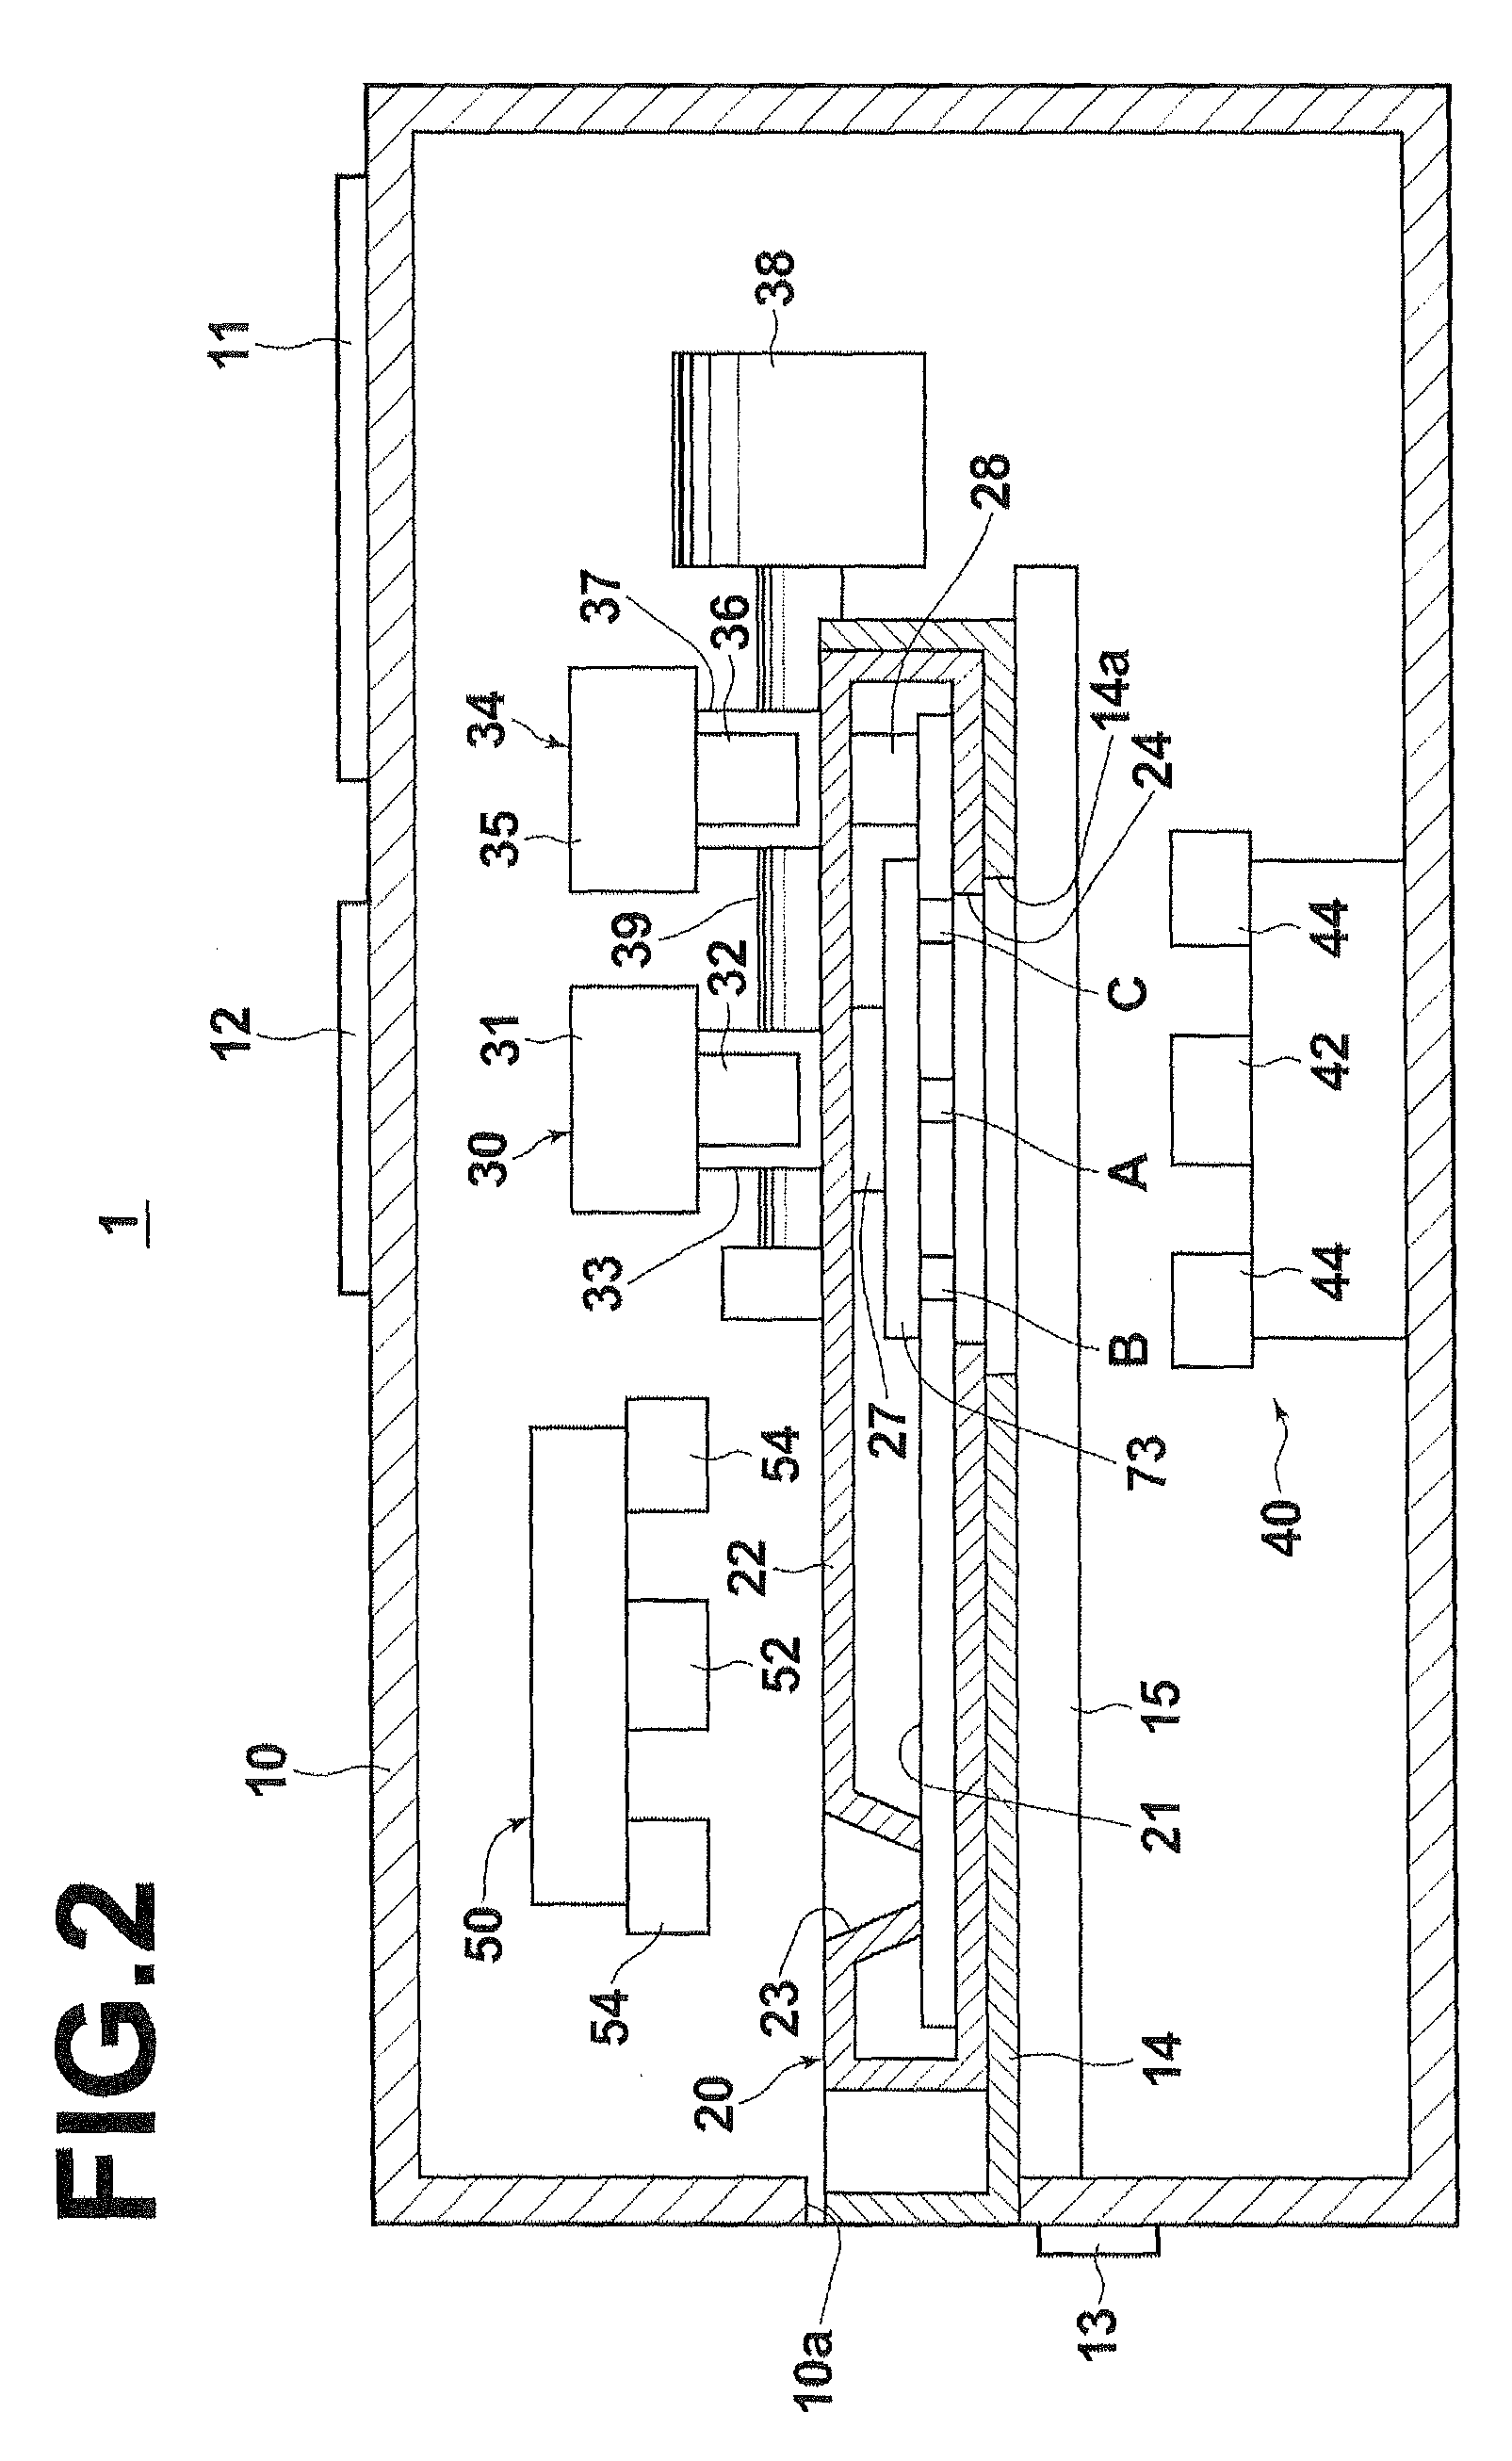 Test method and apparatus